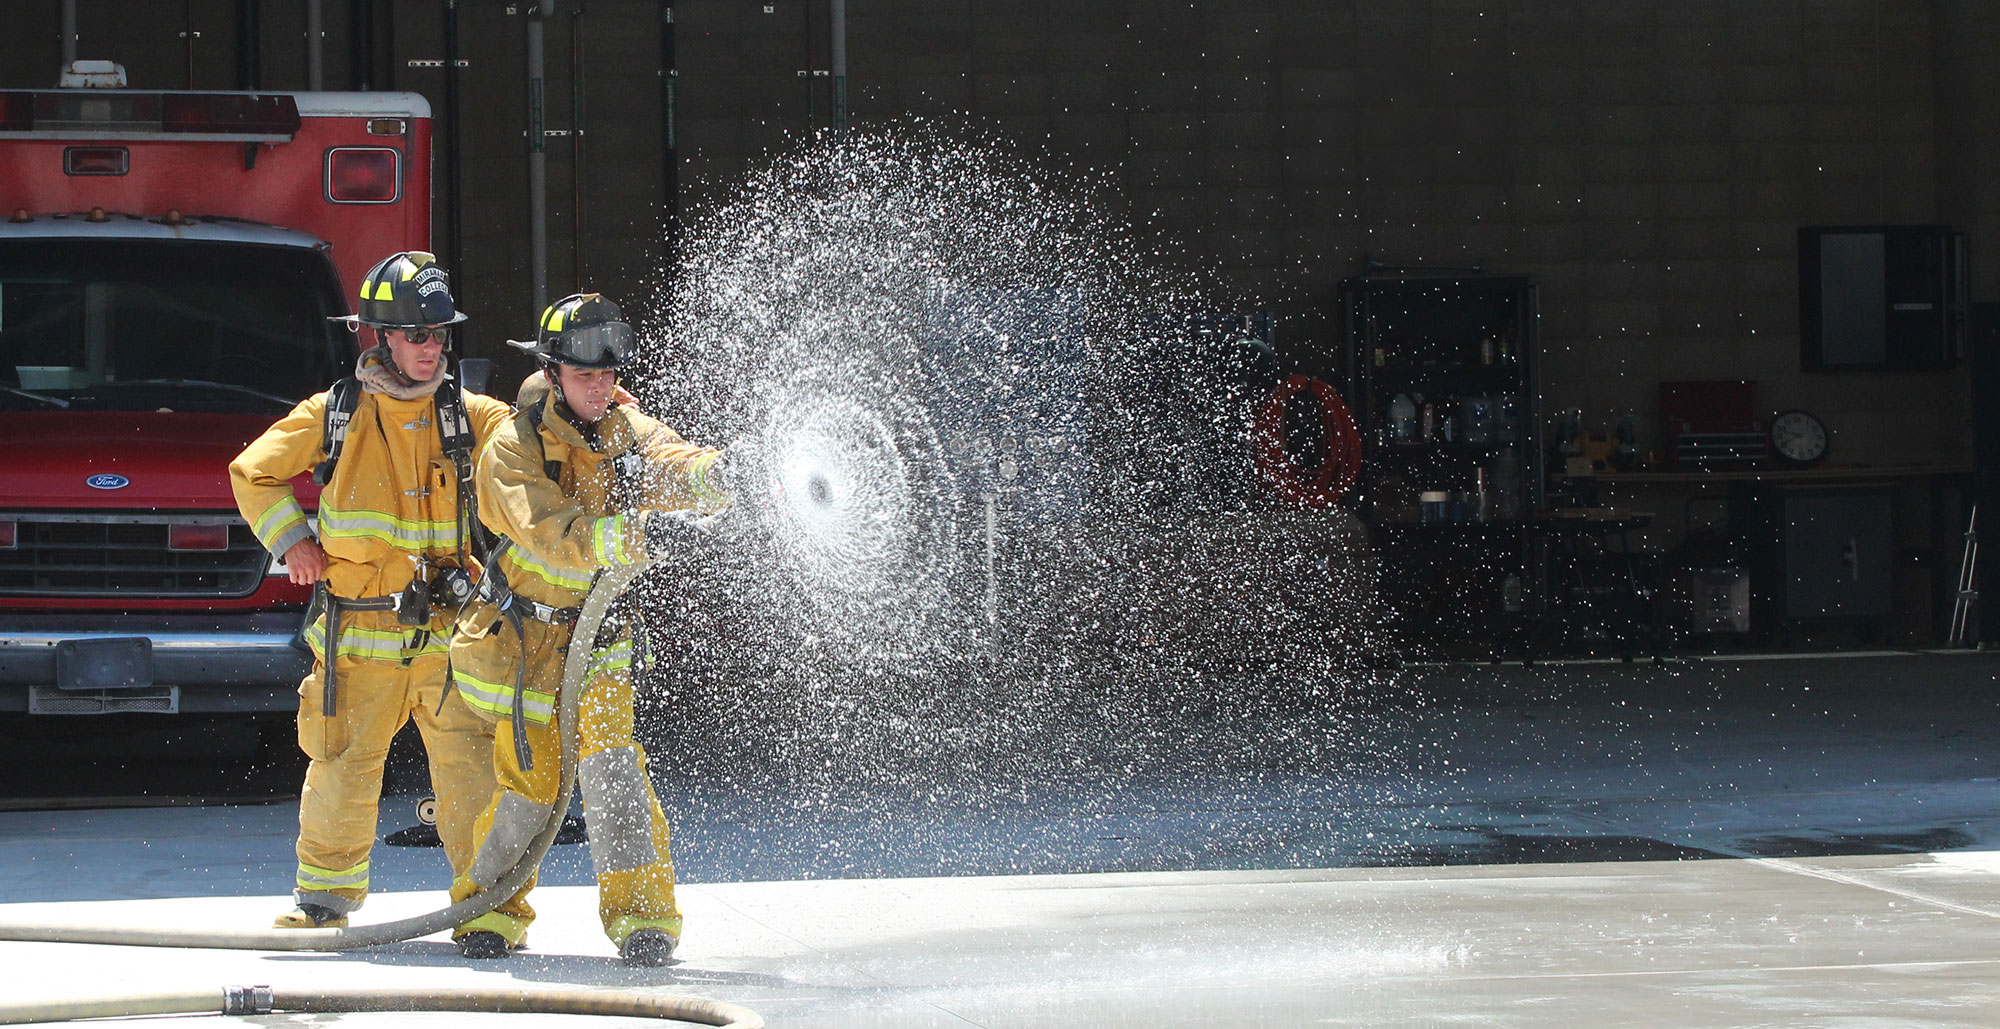 Two firefighting students in full yellow fire gear. One is spraying a fire hose.